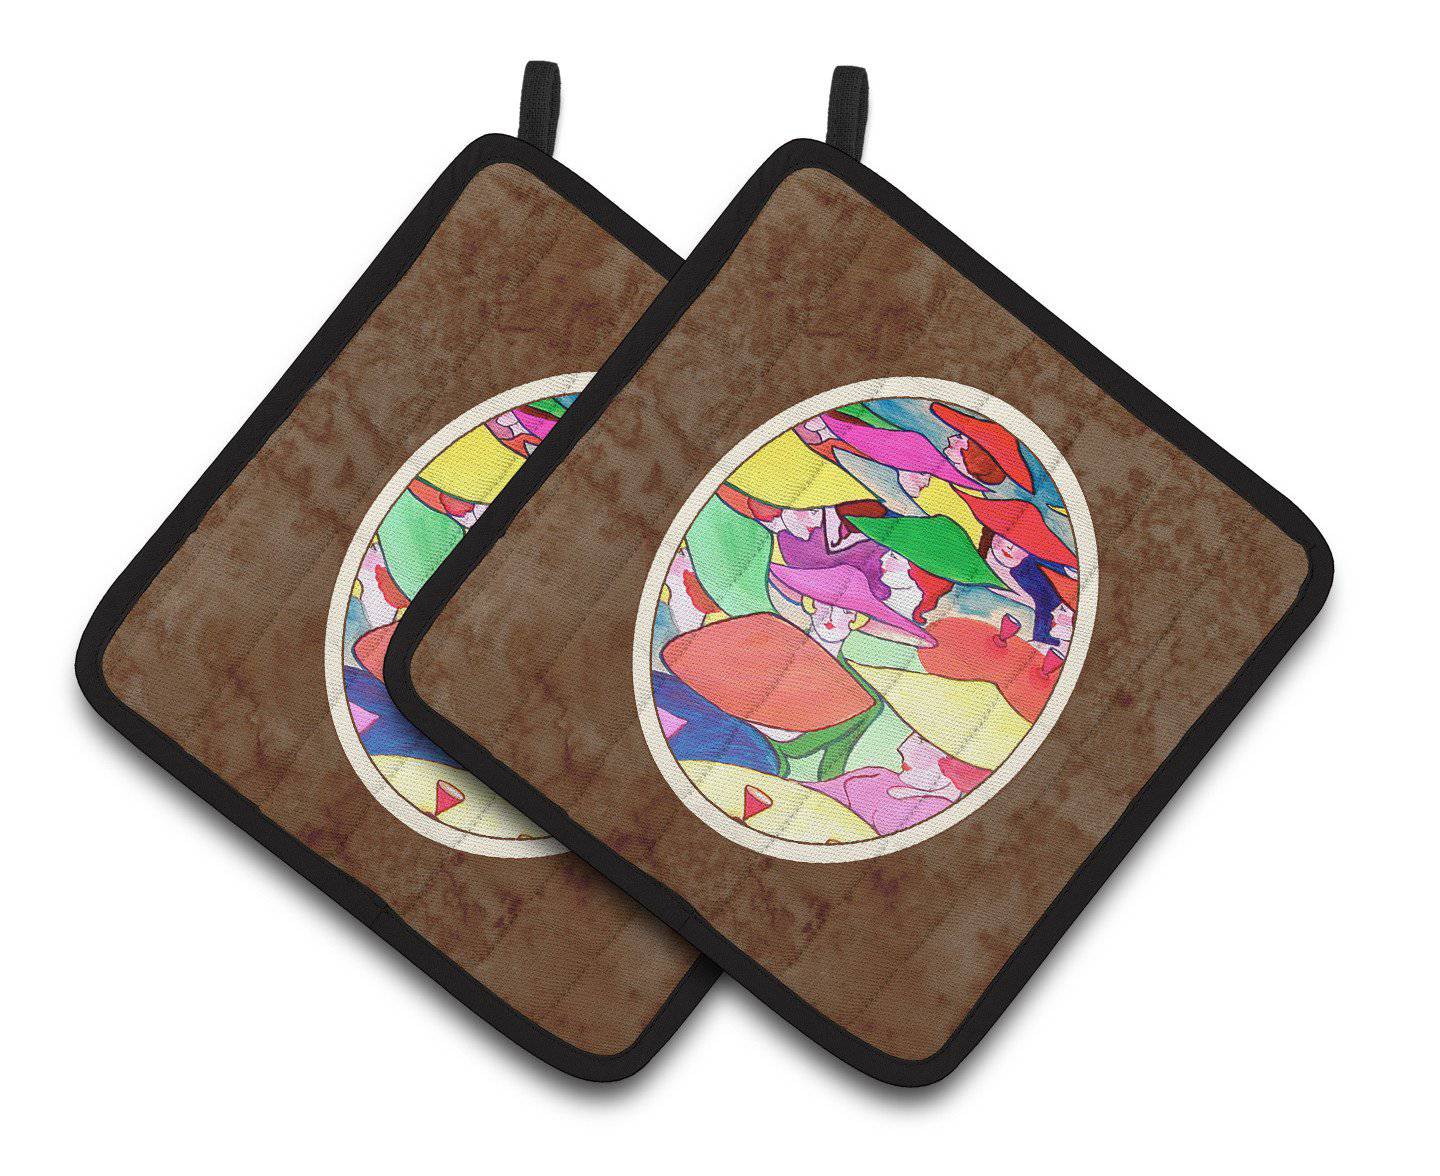 Women in Hats Pair of Pot Holders 7194PTHD - the-store.com